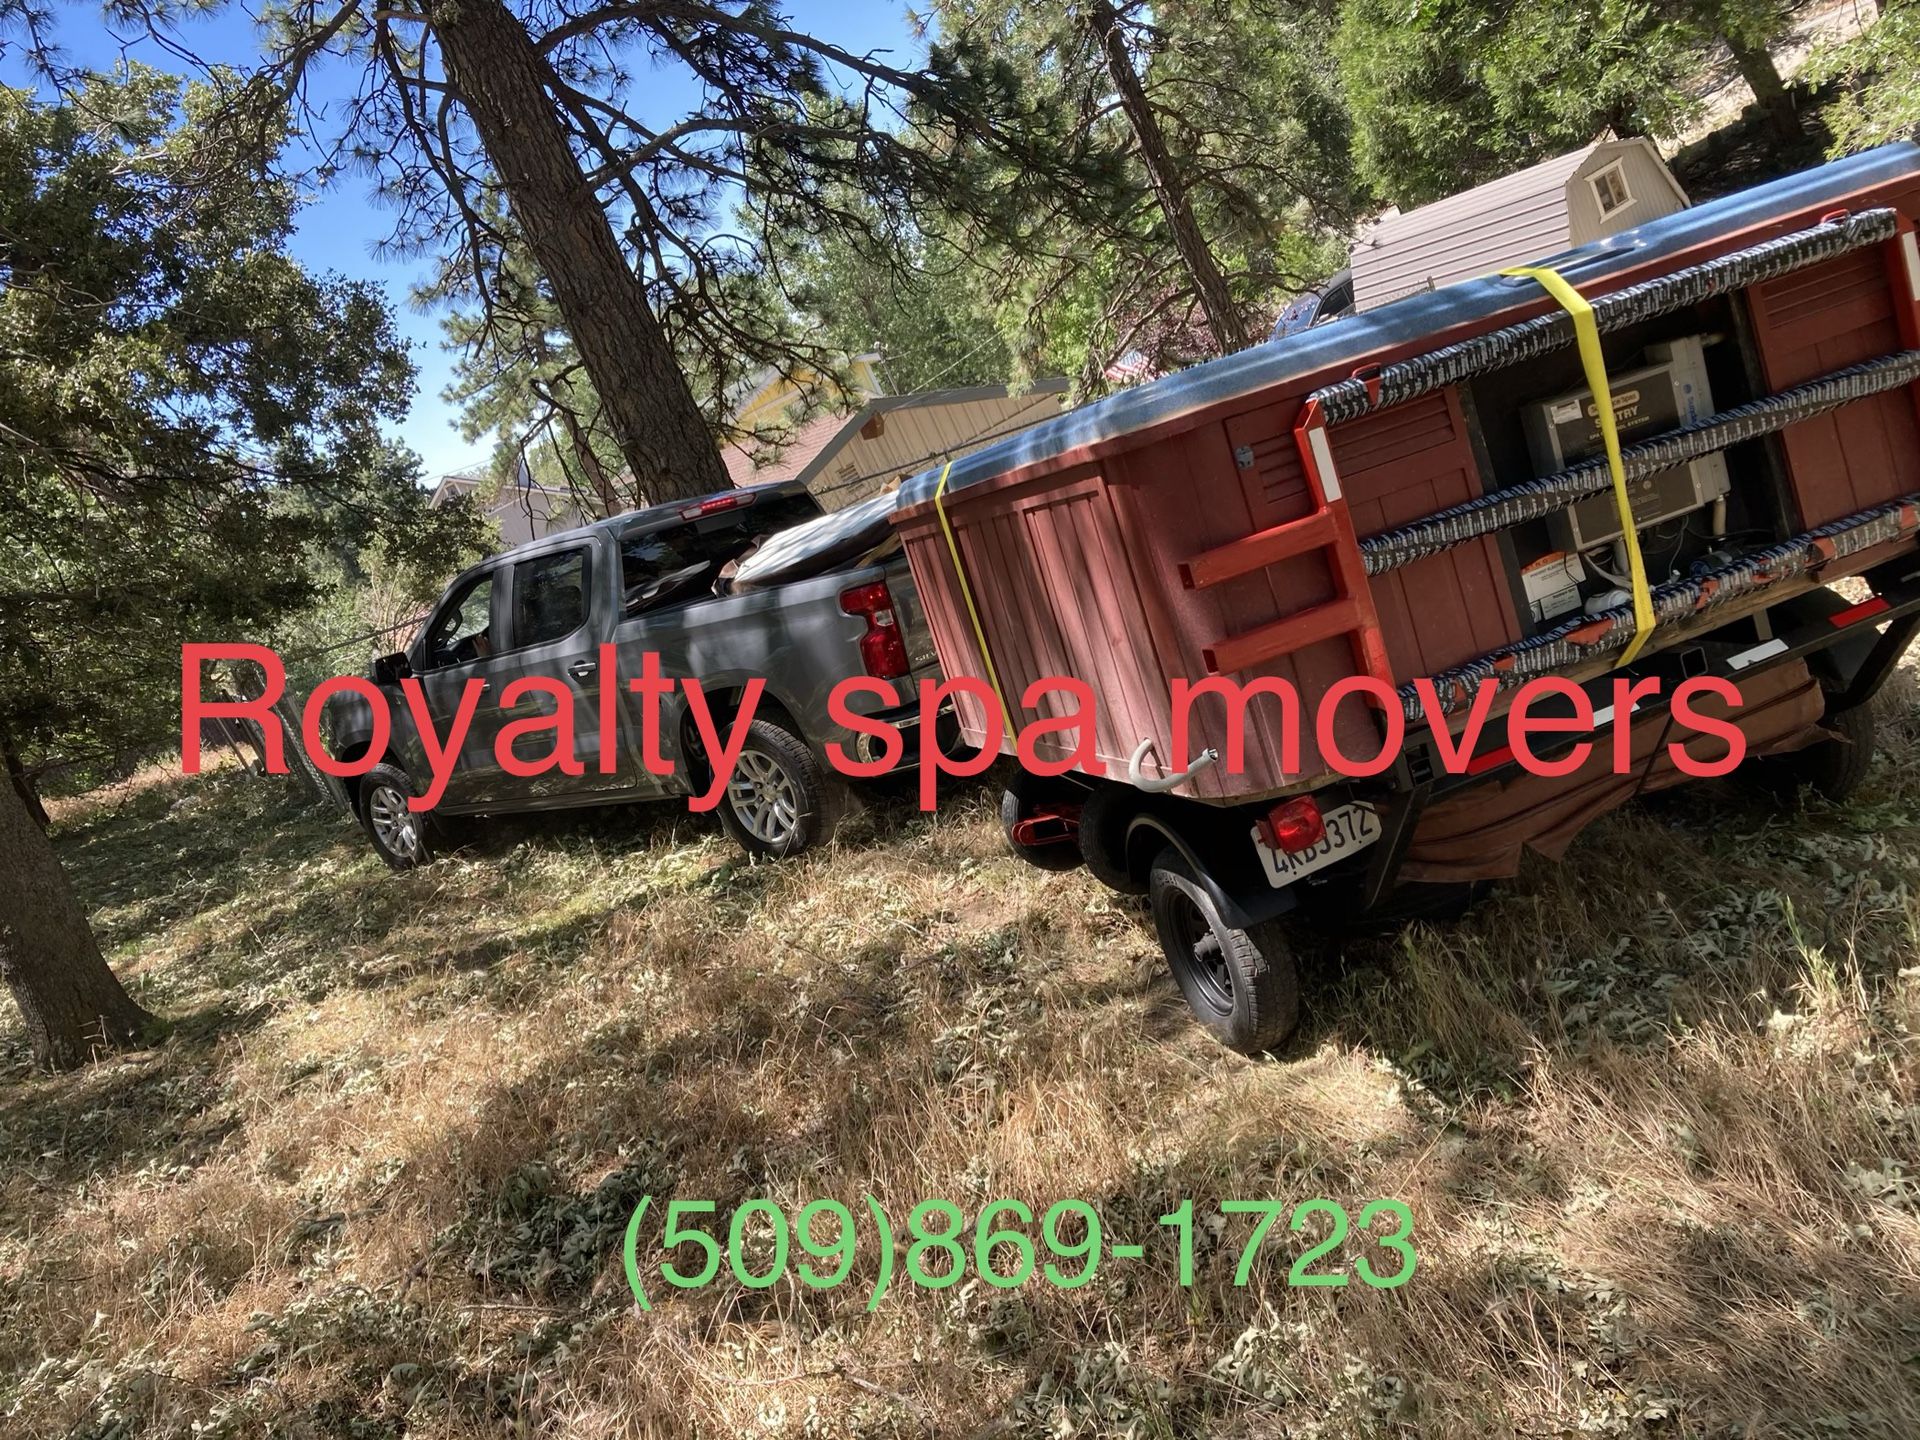 Royalty Spa Movers